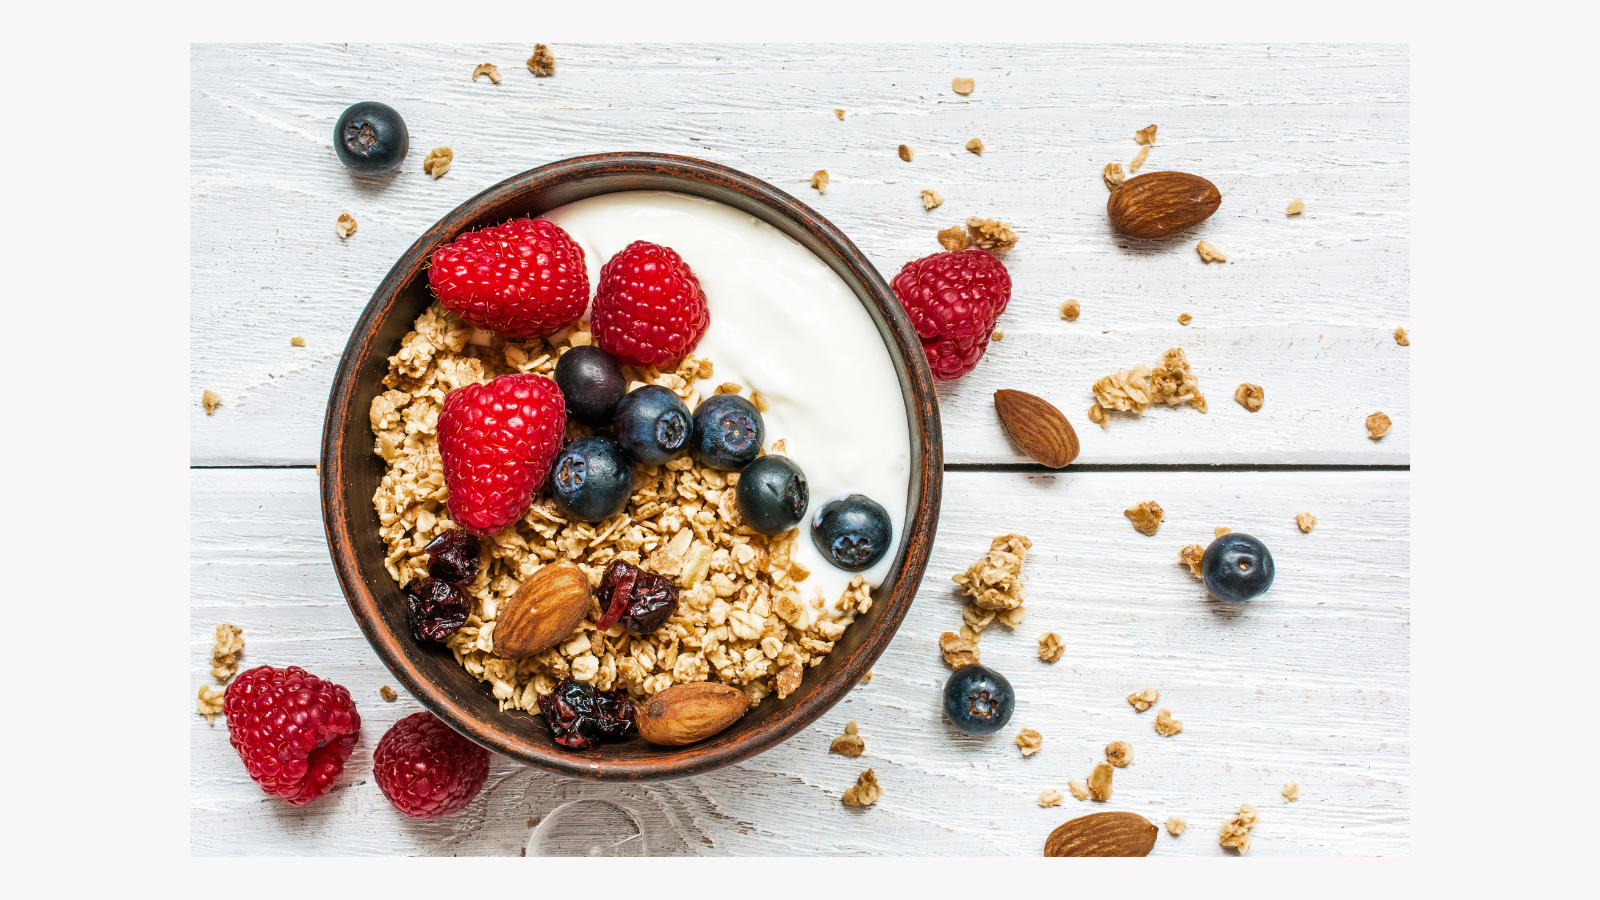 Bowl of yogurt, berries and granola for a healthy meal on a vegetarian diet eating plan.  Good for diabetics, people with diabetes or prediabetes, high blood pressure or obesity